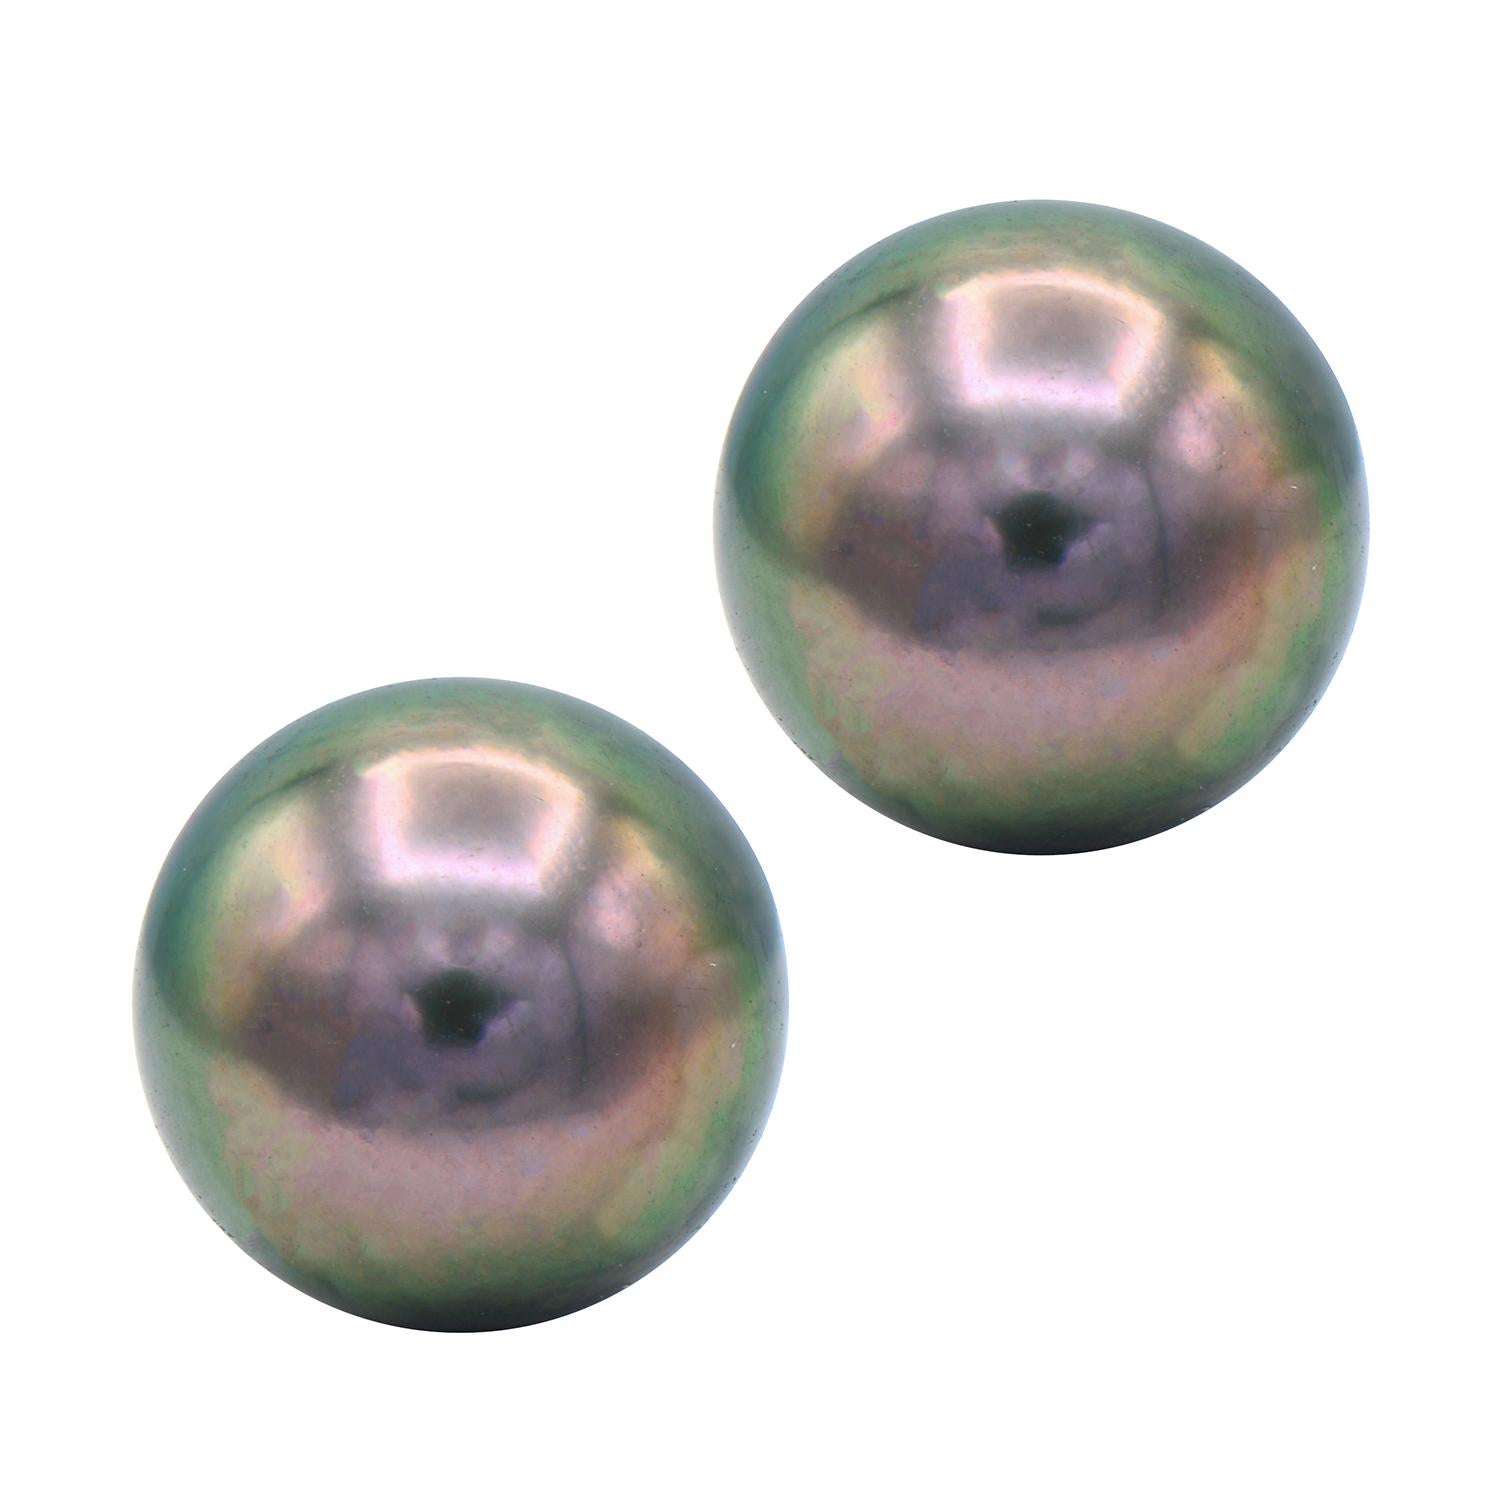 Tahitian Pearl Studs give a little twist to the classic white pearl studs. The Tahitian Pearl Studs are expertly matched in color, luster, and size to make a perfect pair. These 9.5-10mm beautiful pearls are set in 14 karat white gold.